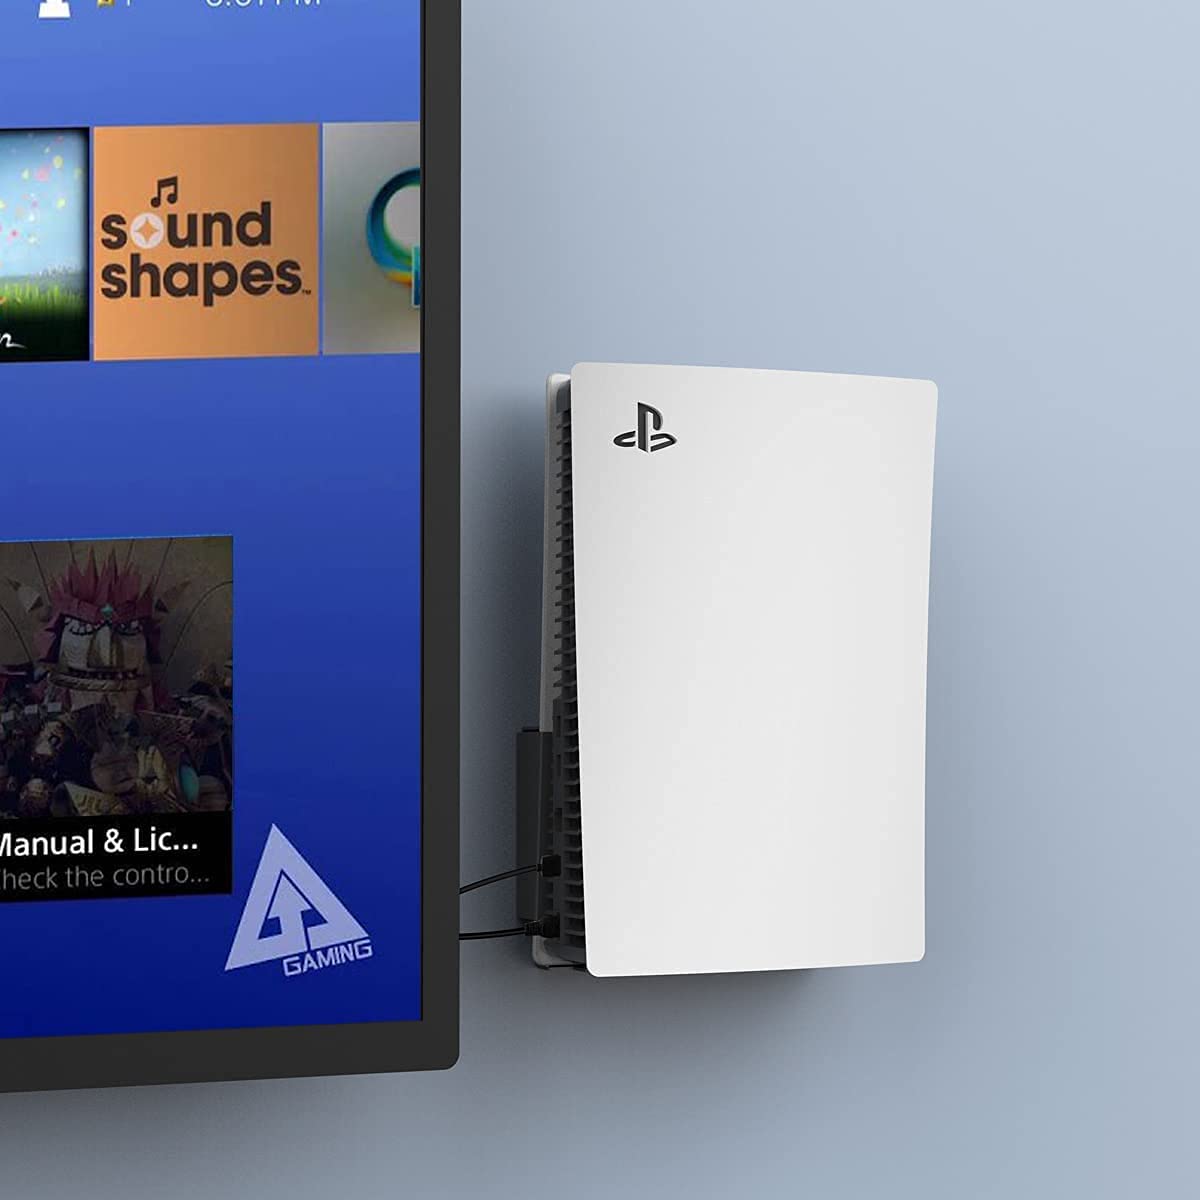 PS5 wall mount